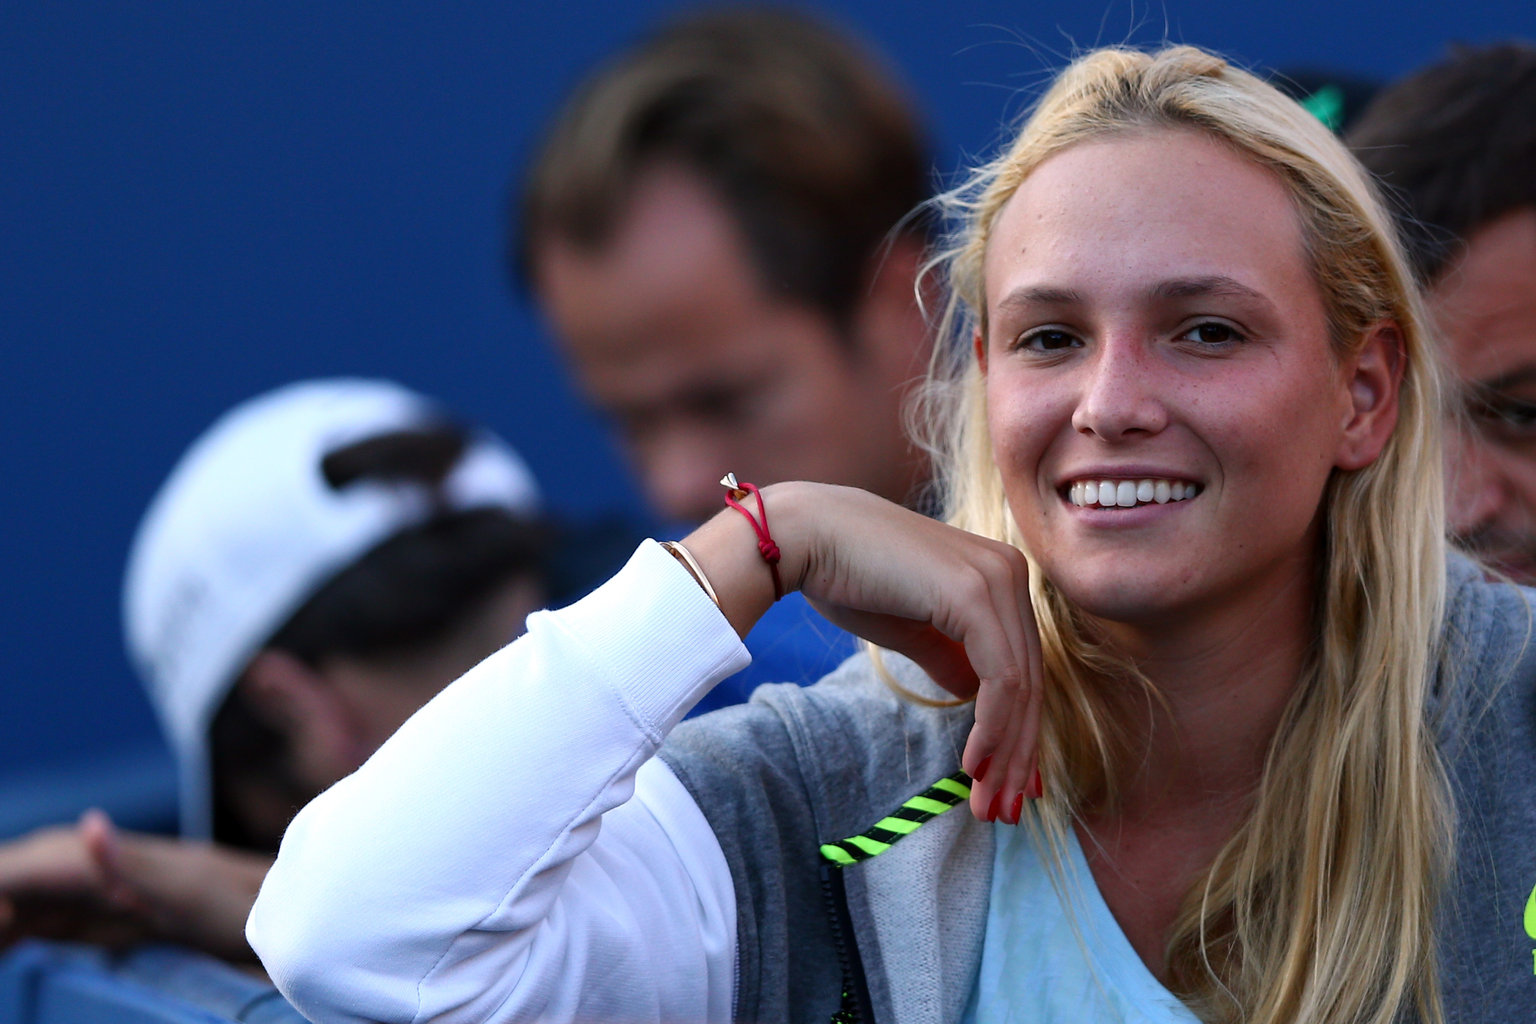 Cute Donna Vekic Beautiful Smile In Stadium Hd Mobile Free Download Background Photos